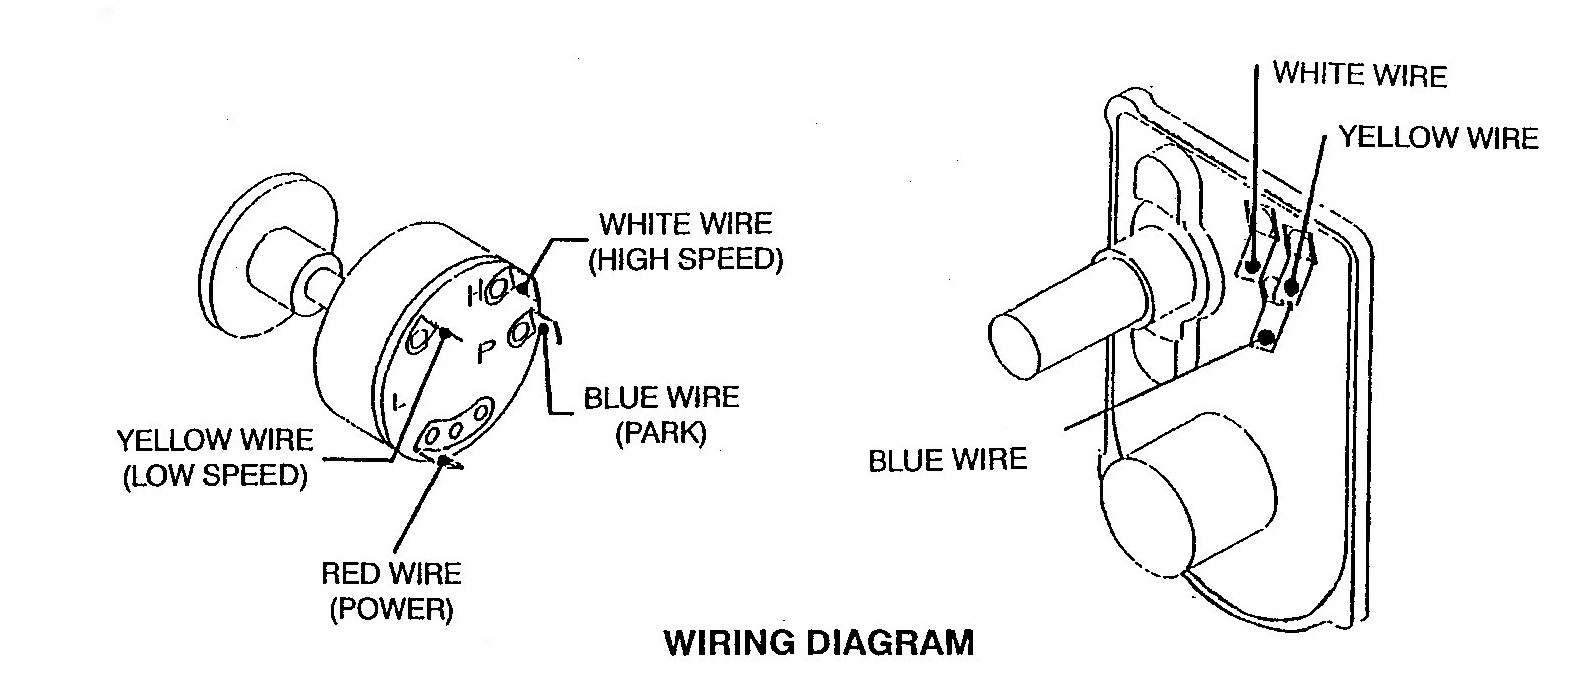 2 Speed Motor Wiring Diagram from newportwipers.com